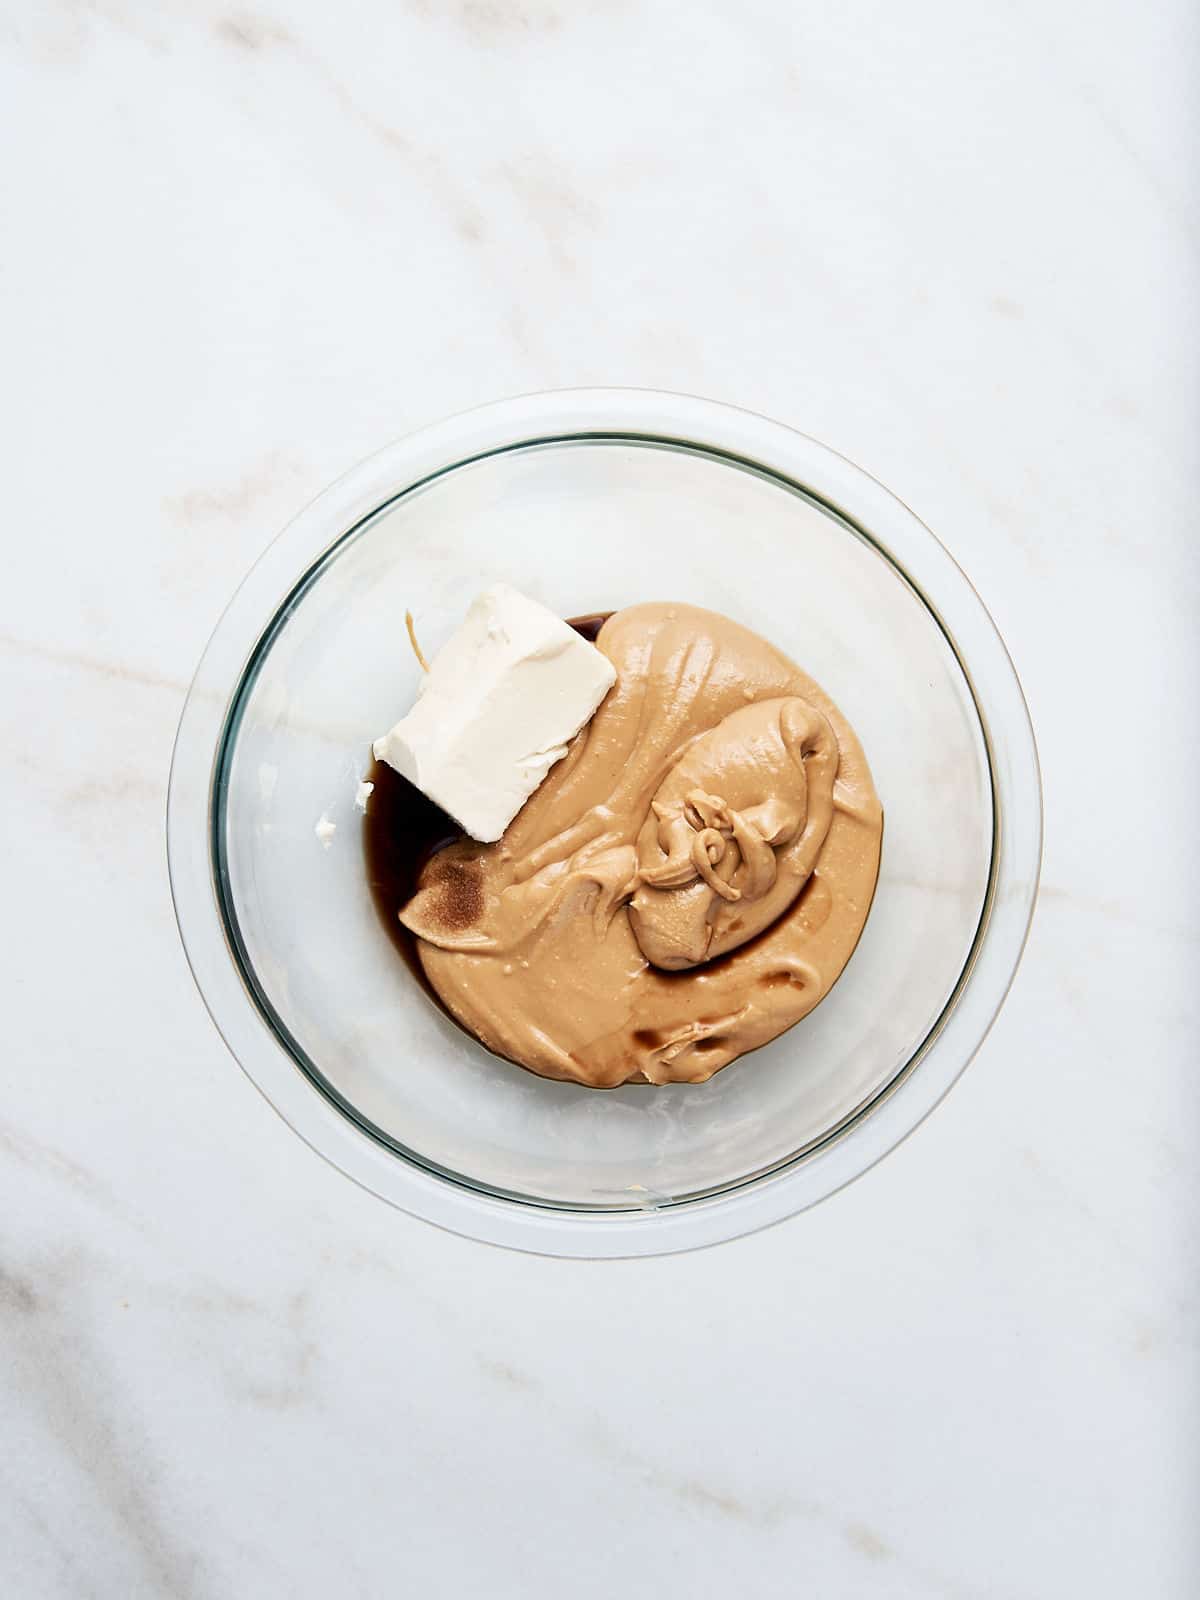 Glass bowl on a white surface with peanut butter, butter, and vanilla.